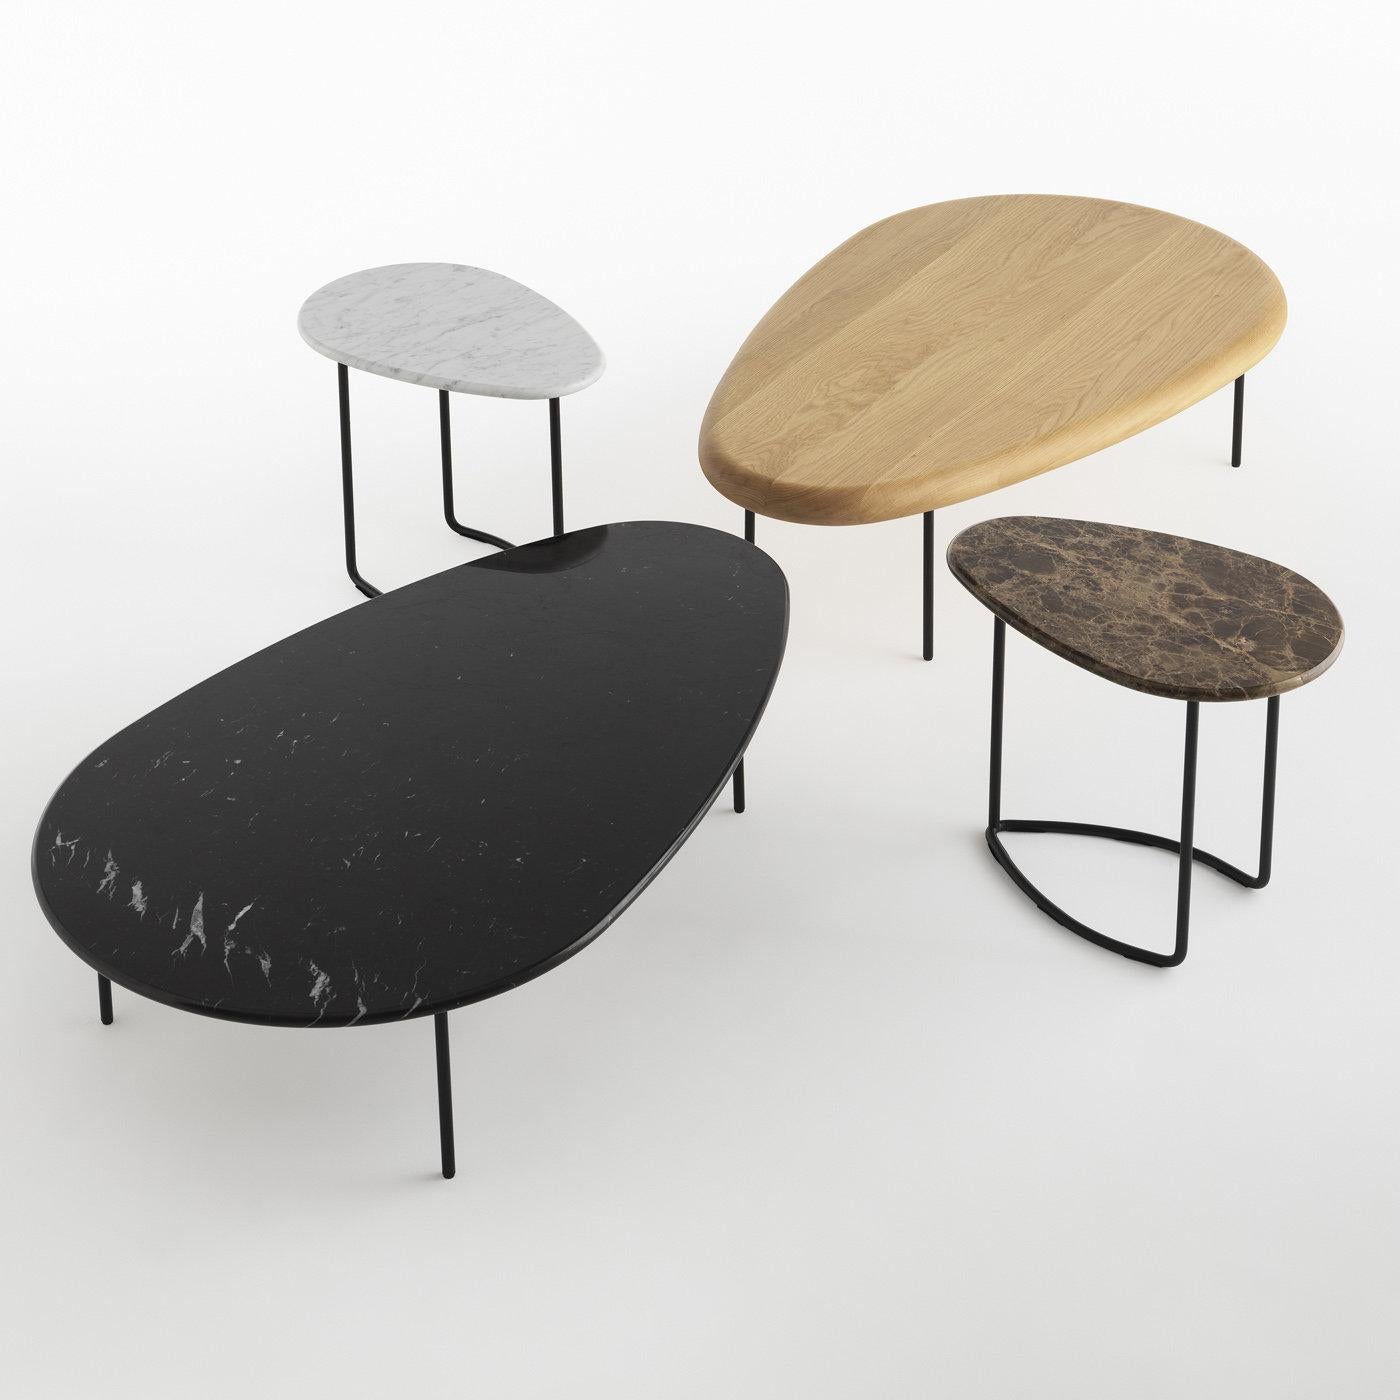 The concept of customization is at the basis of the Lily Collection of tables designed by Marc Thorpe, inspired by the shape of the flowering plant Nymphaeaceae. Available with fabric, wood, and marble tops, the featured table has a striking black